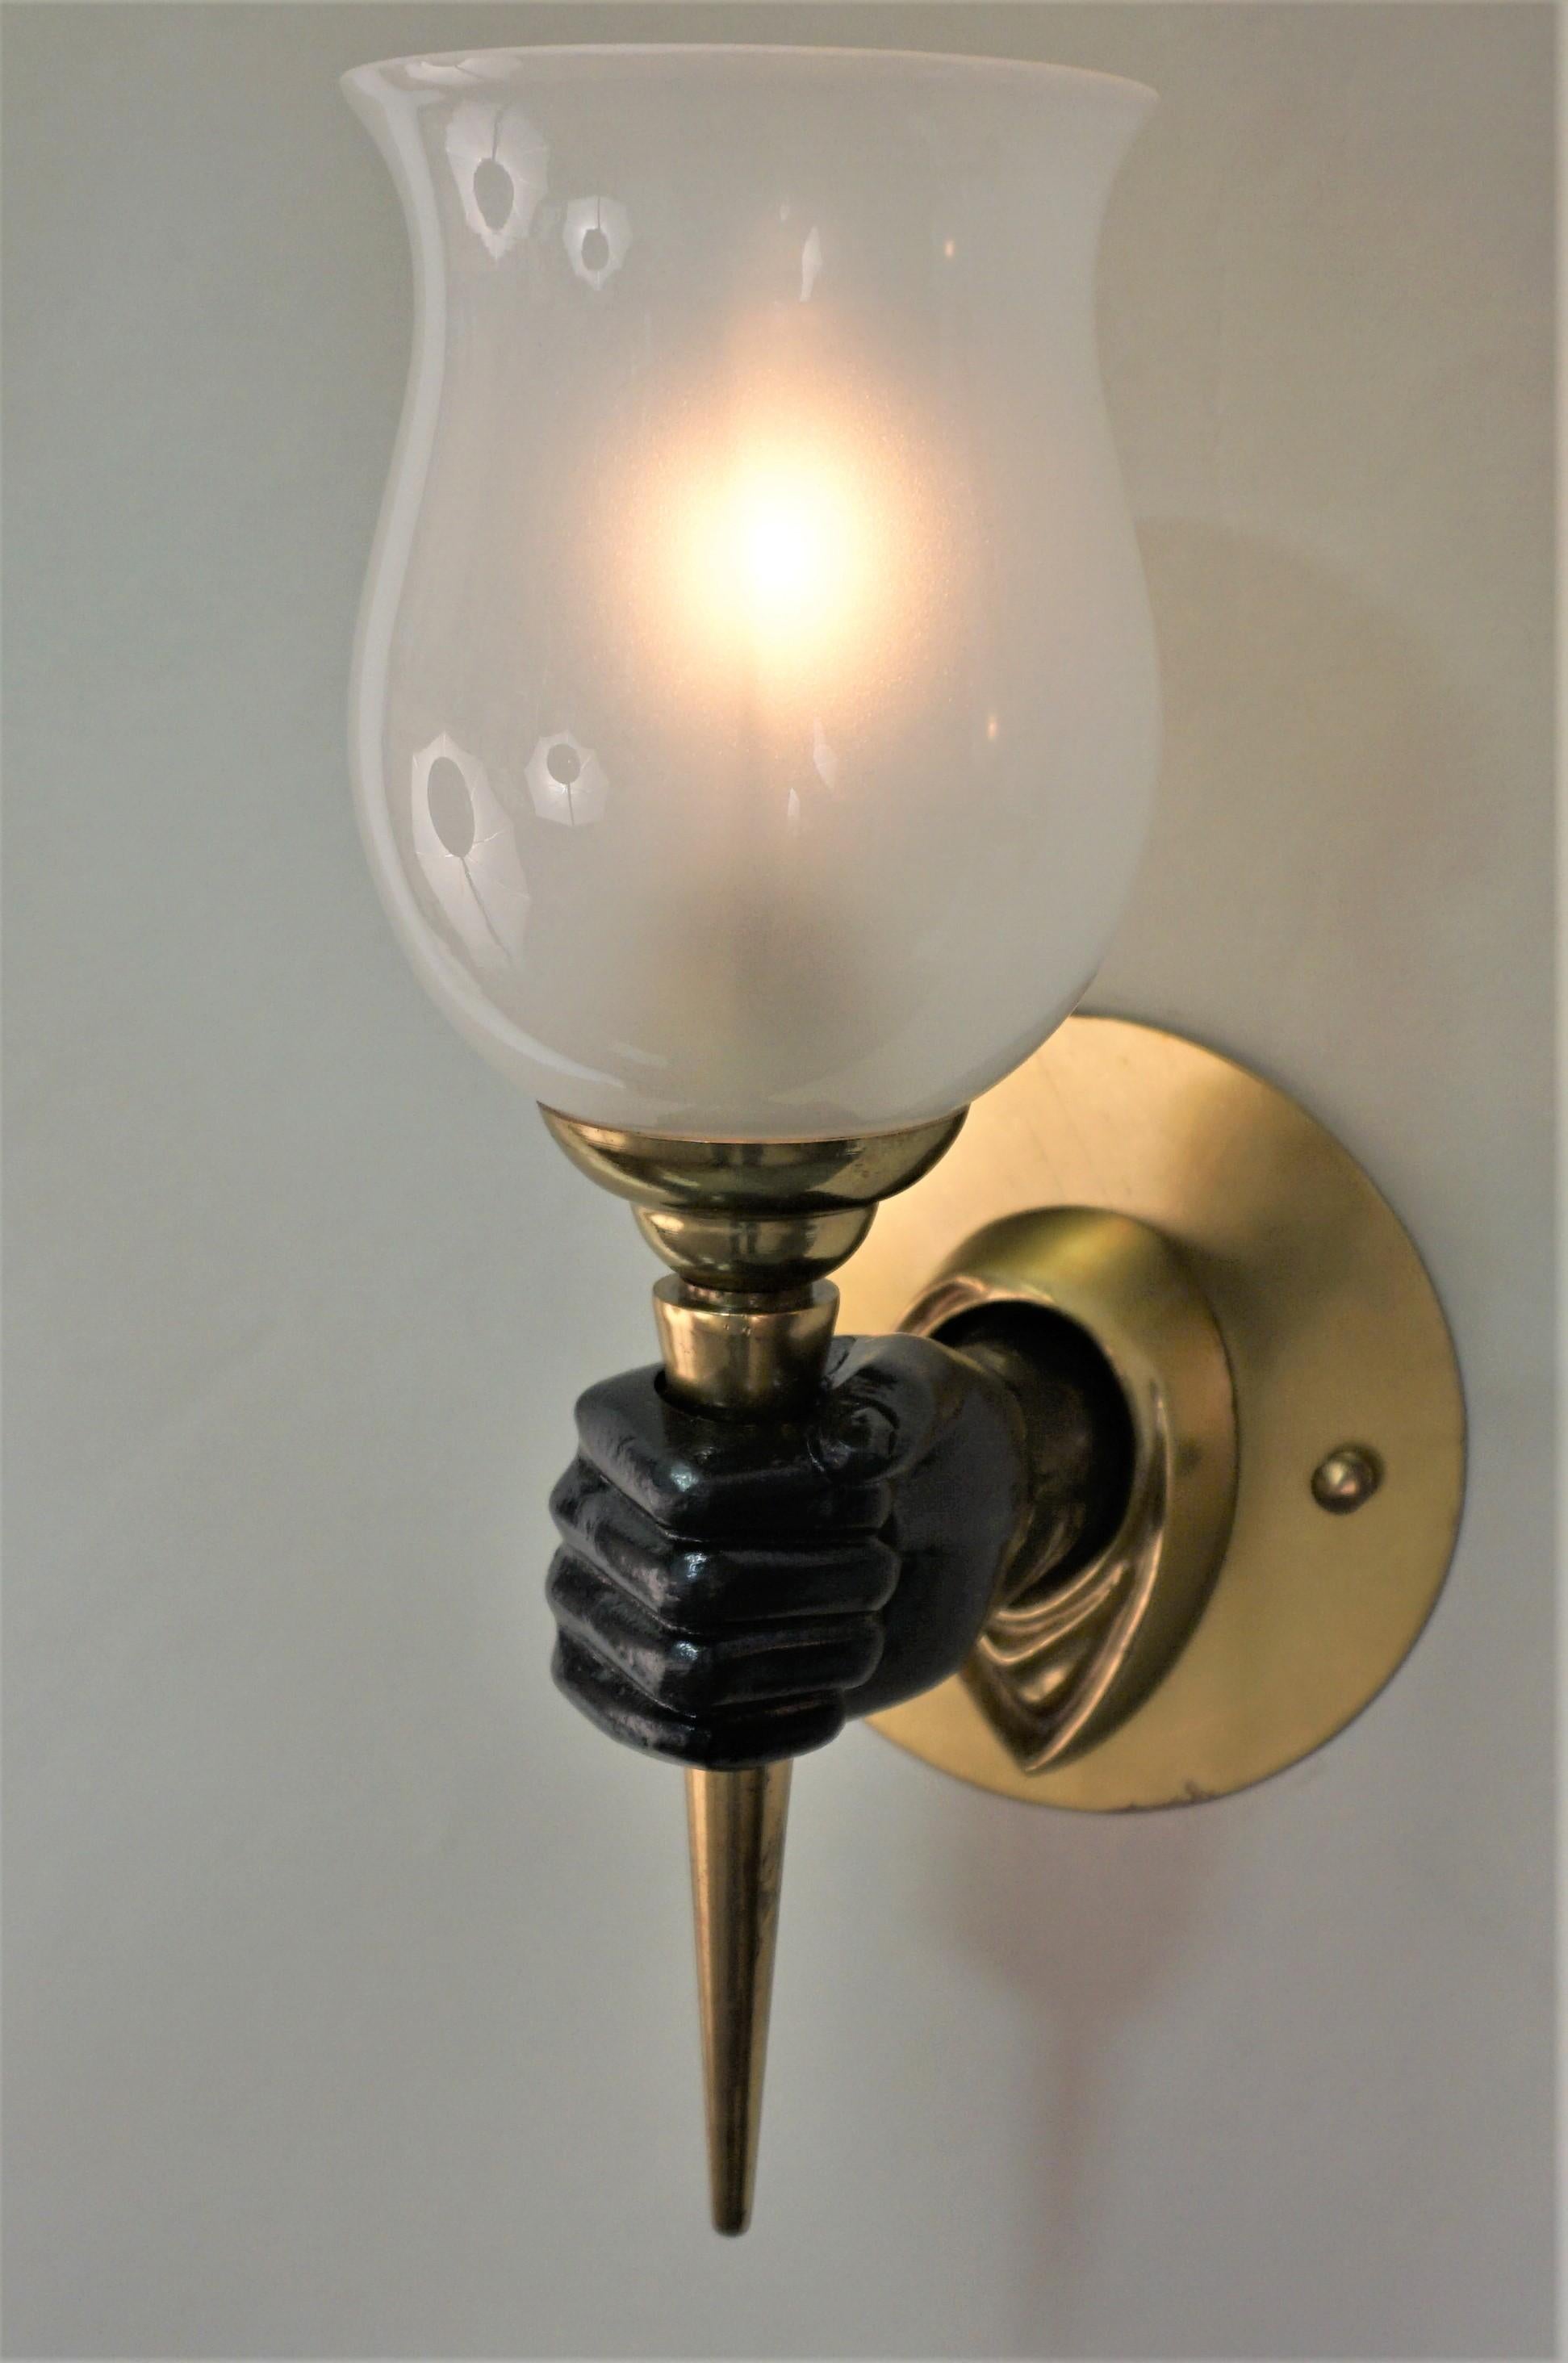 Elegant pair of bronze with black lacquer hand wall sconce with original glass shades.
Measures: Depth 7